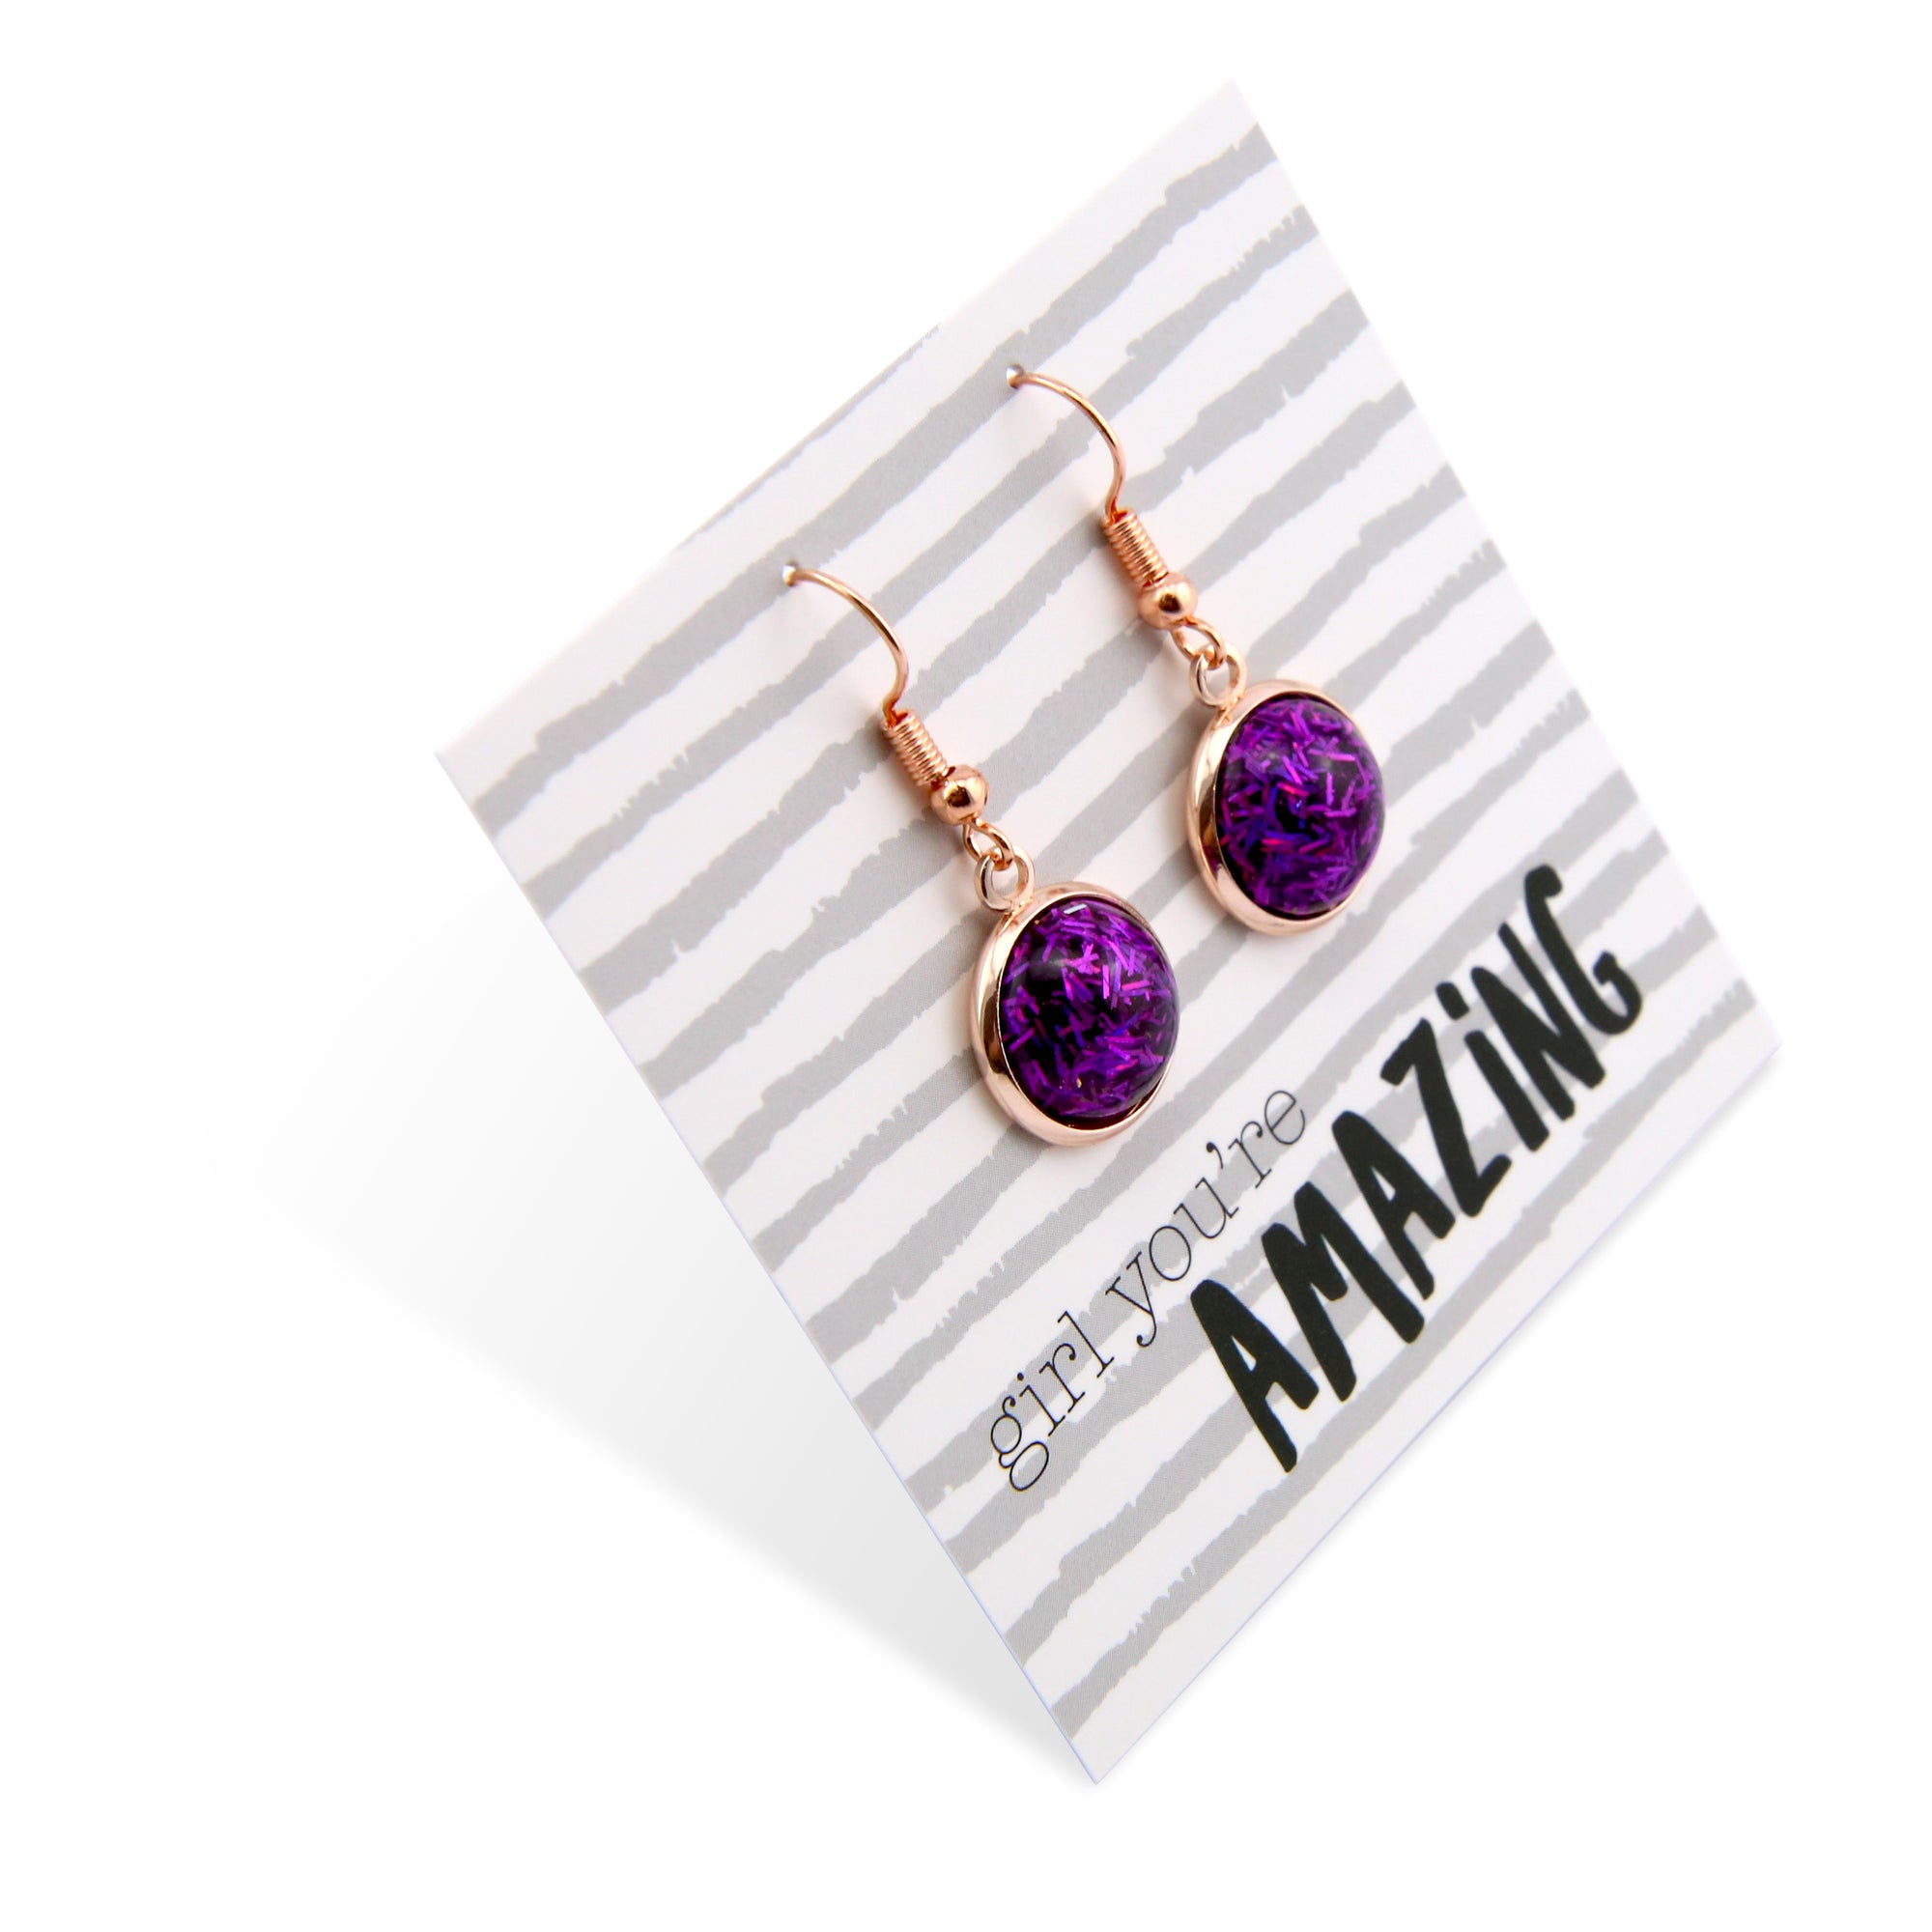 SPARKLEFEST - Girl You're Amazing - Stainless Steel Rose Gold Dangles- Purple Glitter (12621)